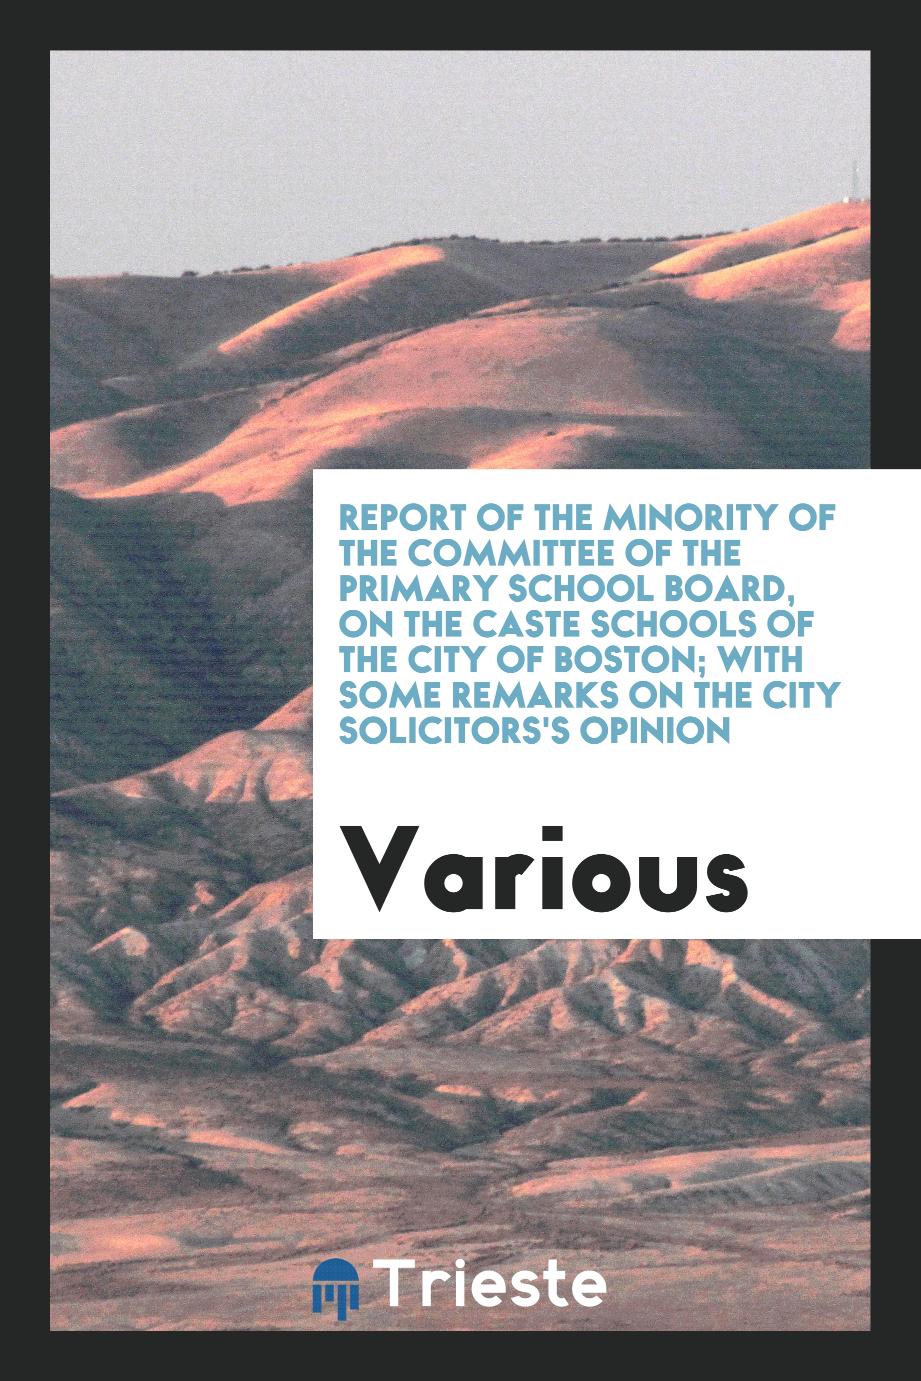 Report of the minority of the committee of the primary school board, on the caste schools of the city of Boston; with some remarks on the city solicitors's opinion